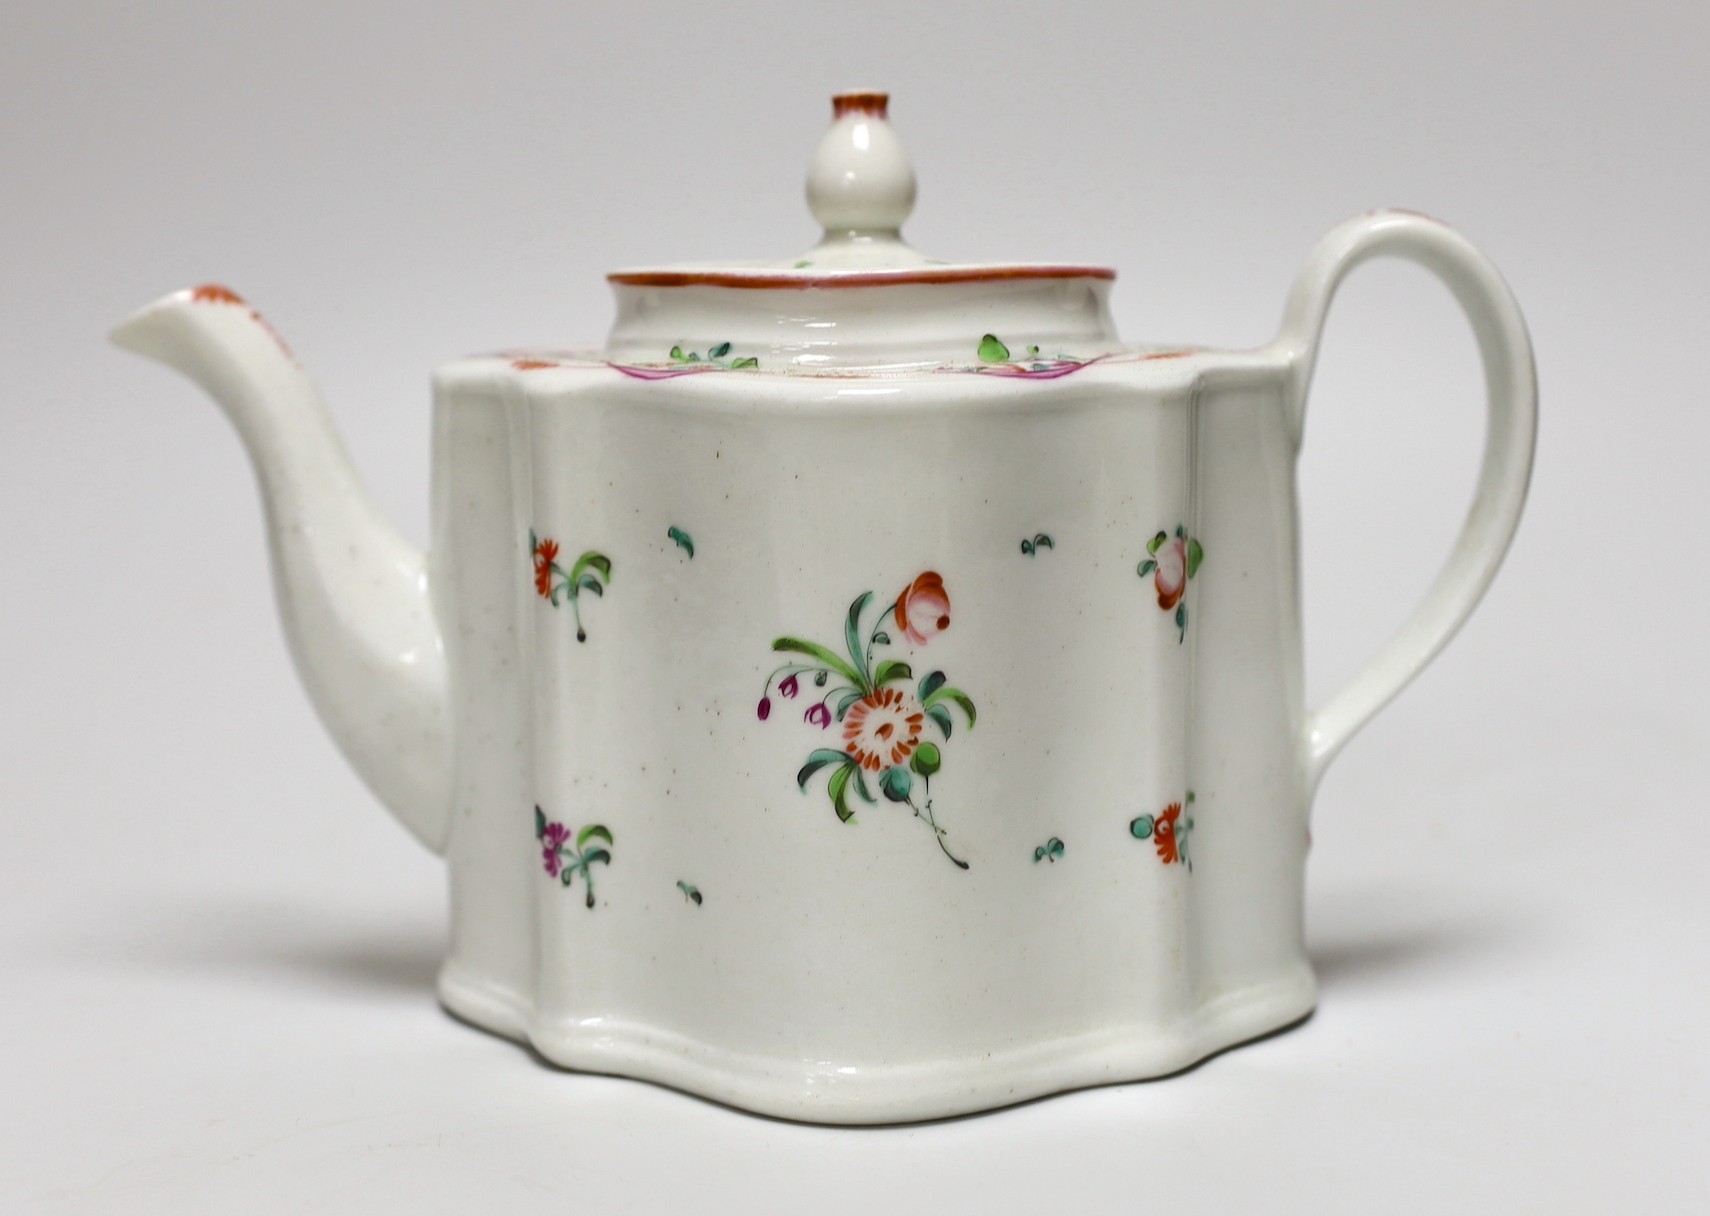 A late 18th century painted Newhall teapot and cover. 14.5cm high